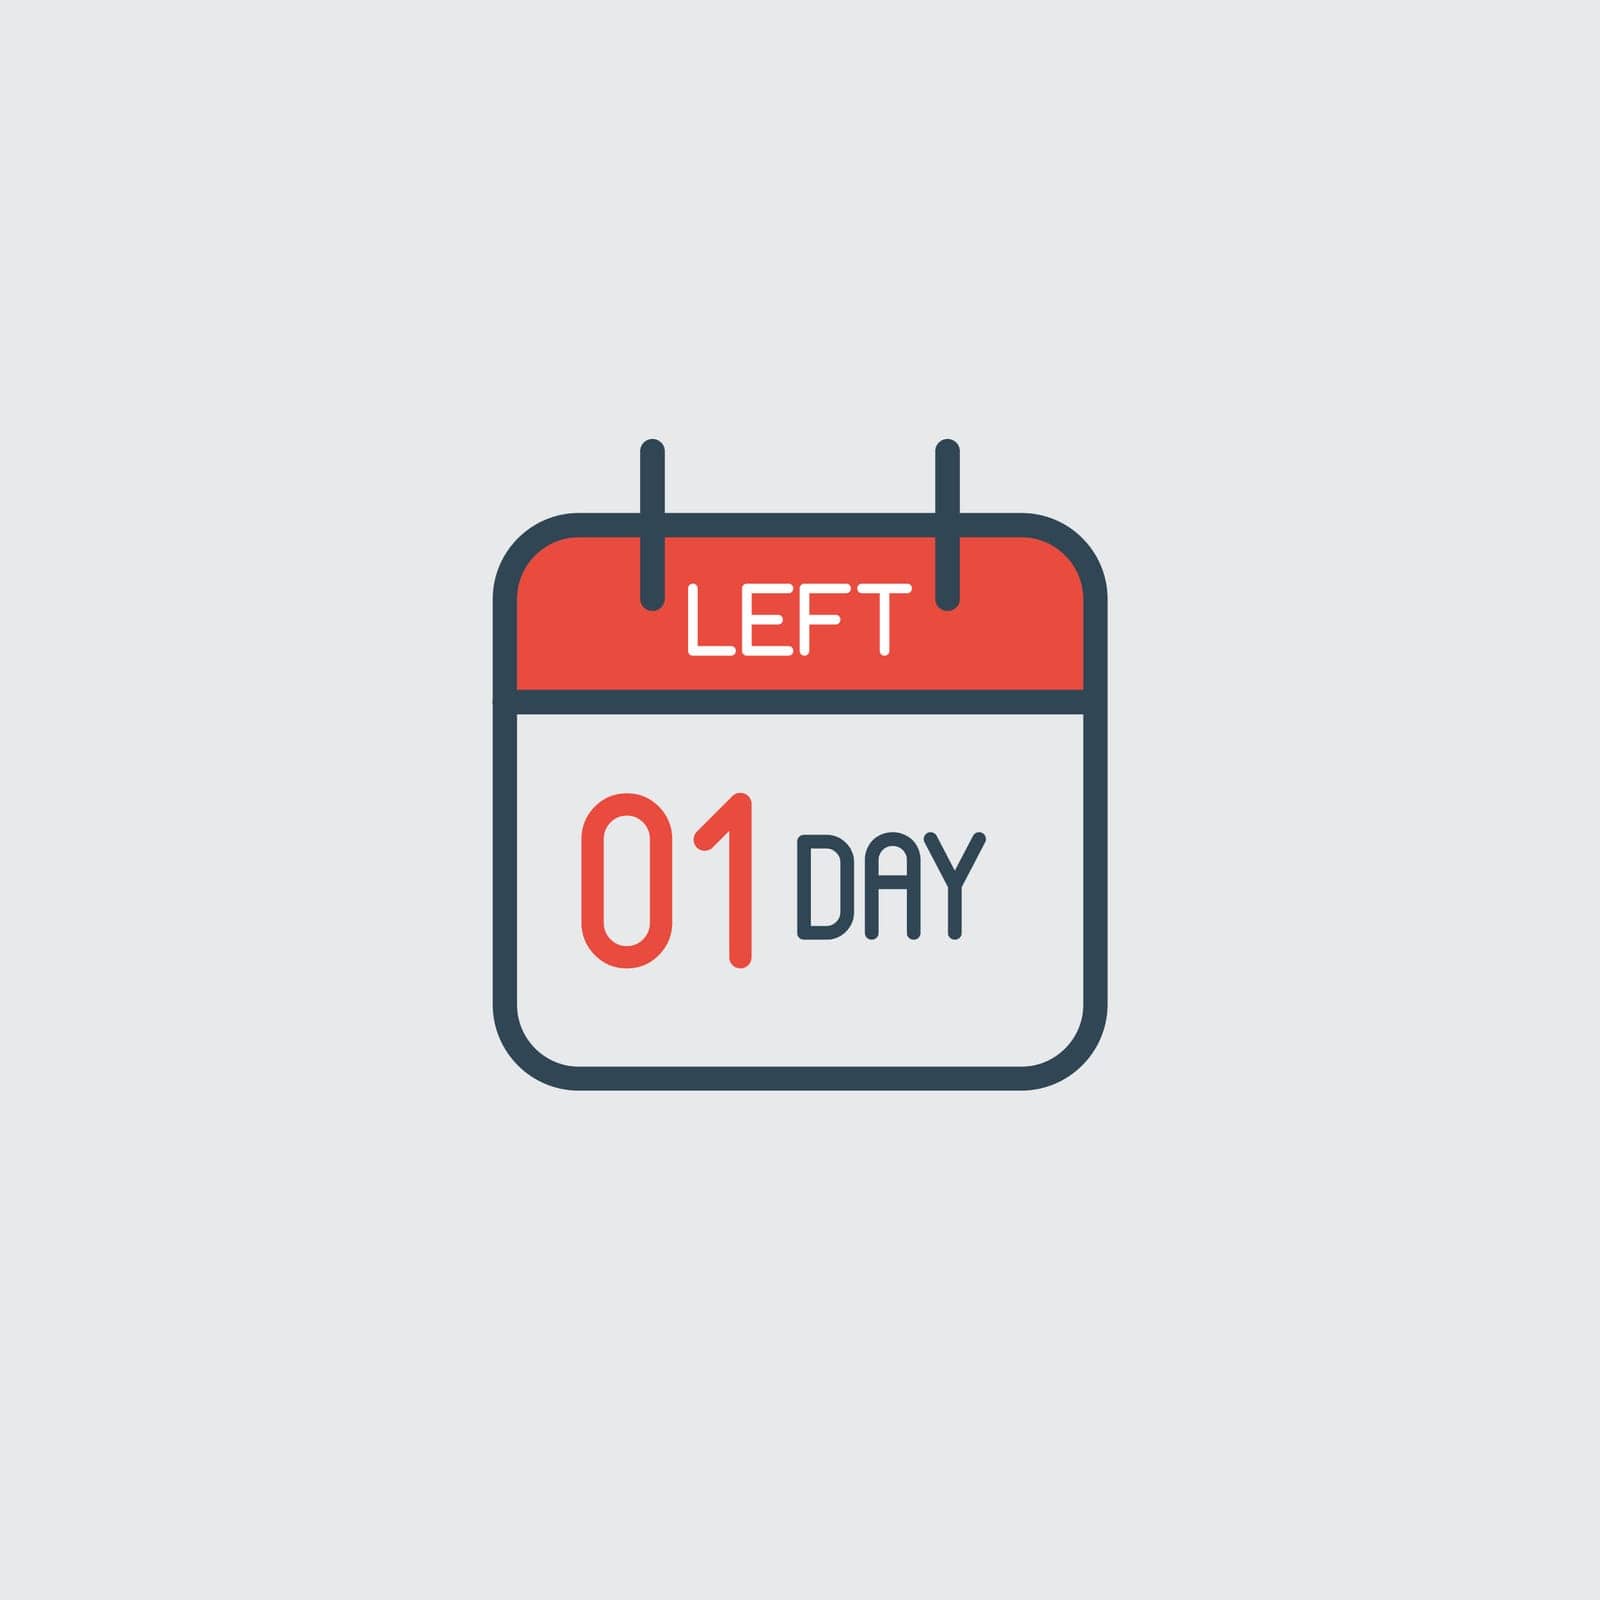 Countdown daily page calendar icon 01 days left. Number day to go. Agenda app, business deadline, date. Reminder, schedule simple pictogram. Countdown for sale, promotion by Kyrylov